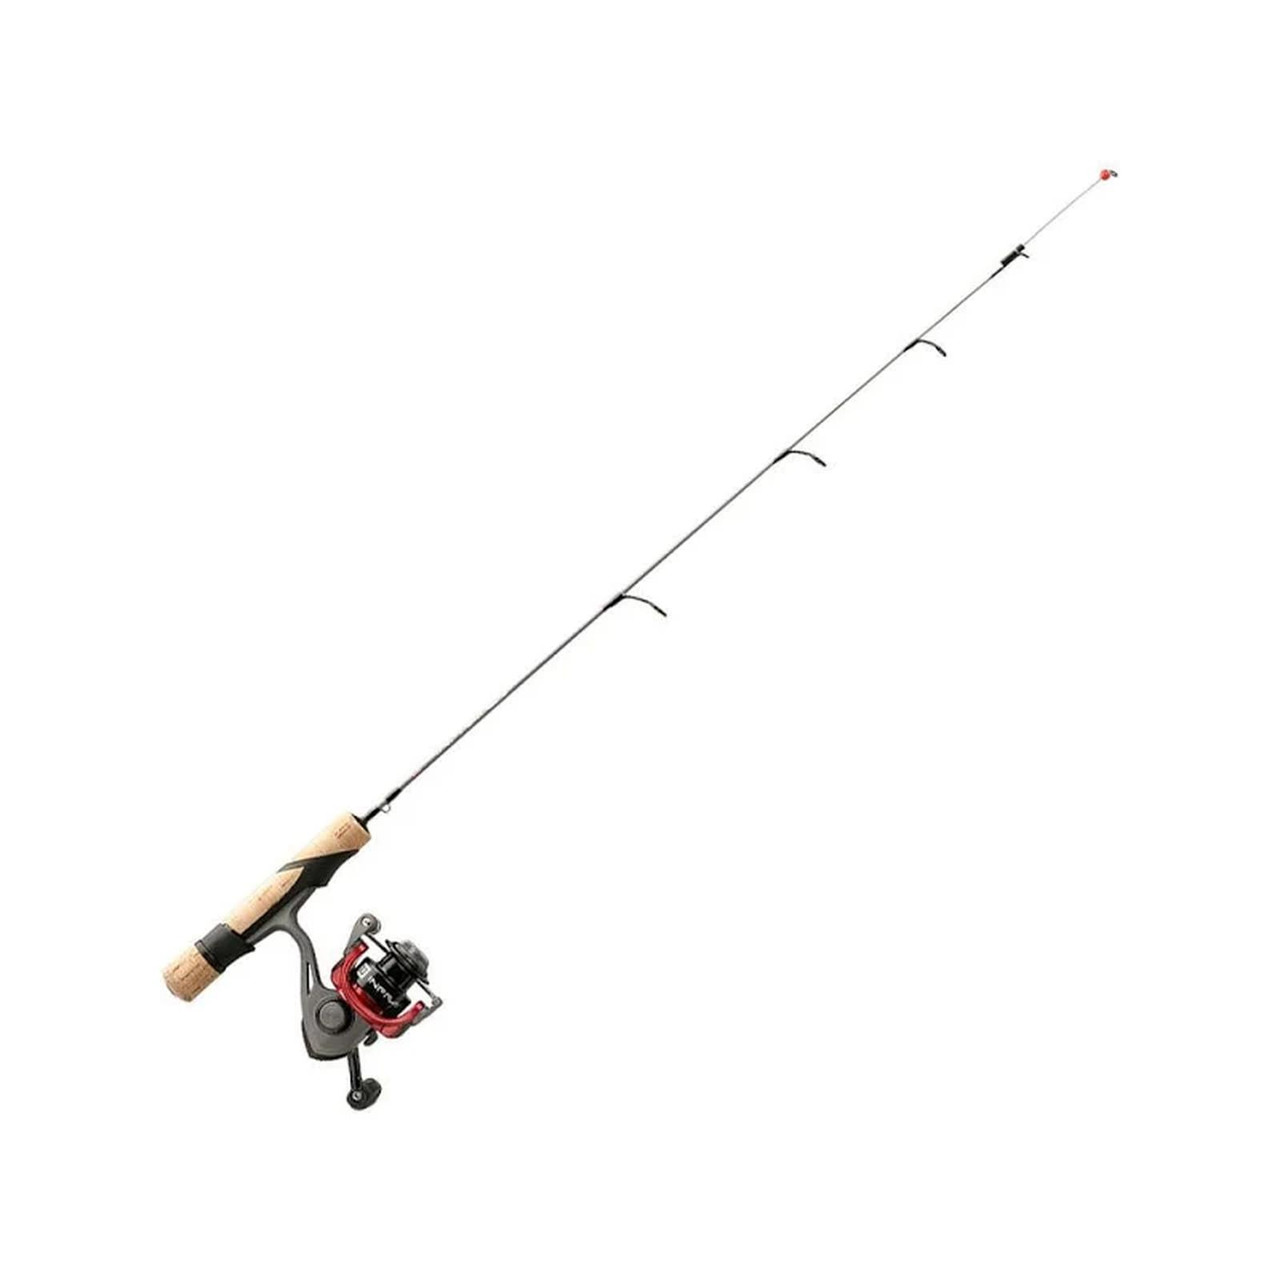 13Fishing® Snitch Descent Combo